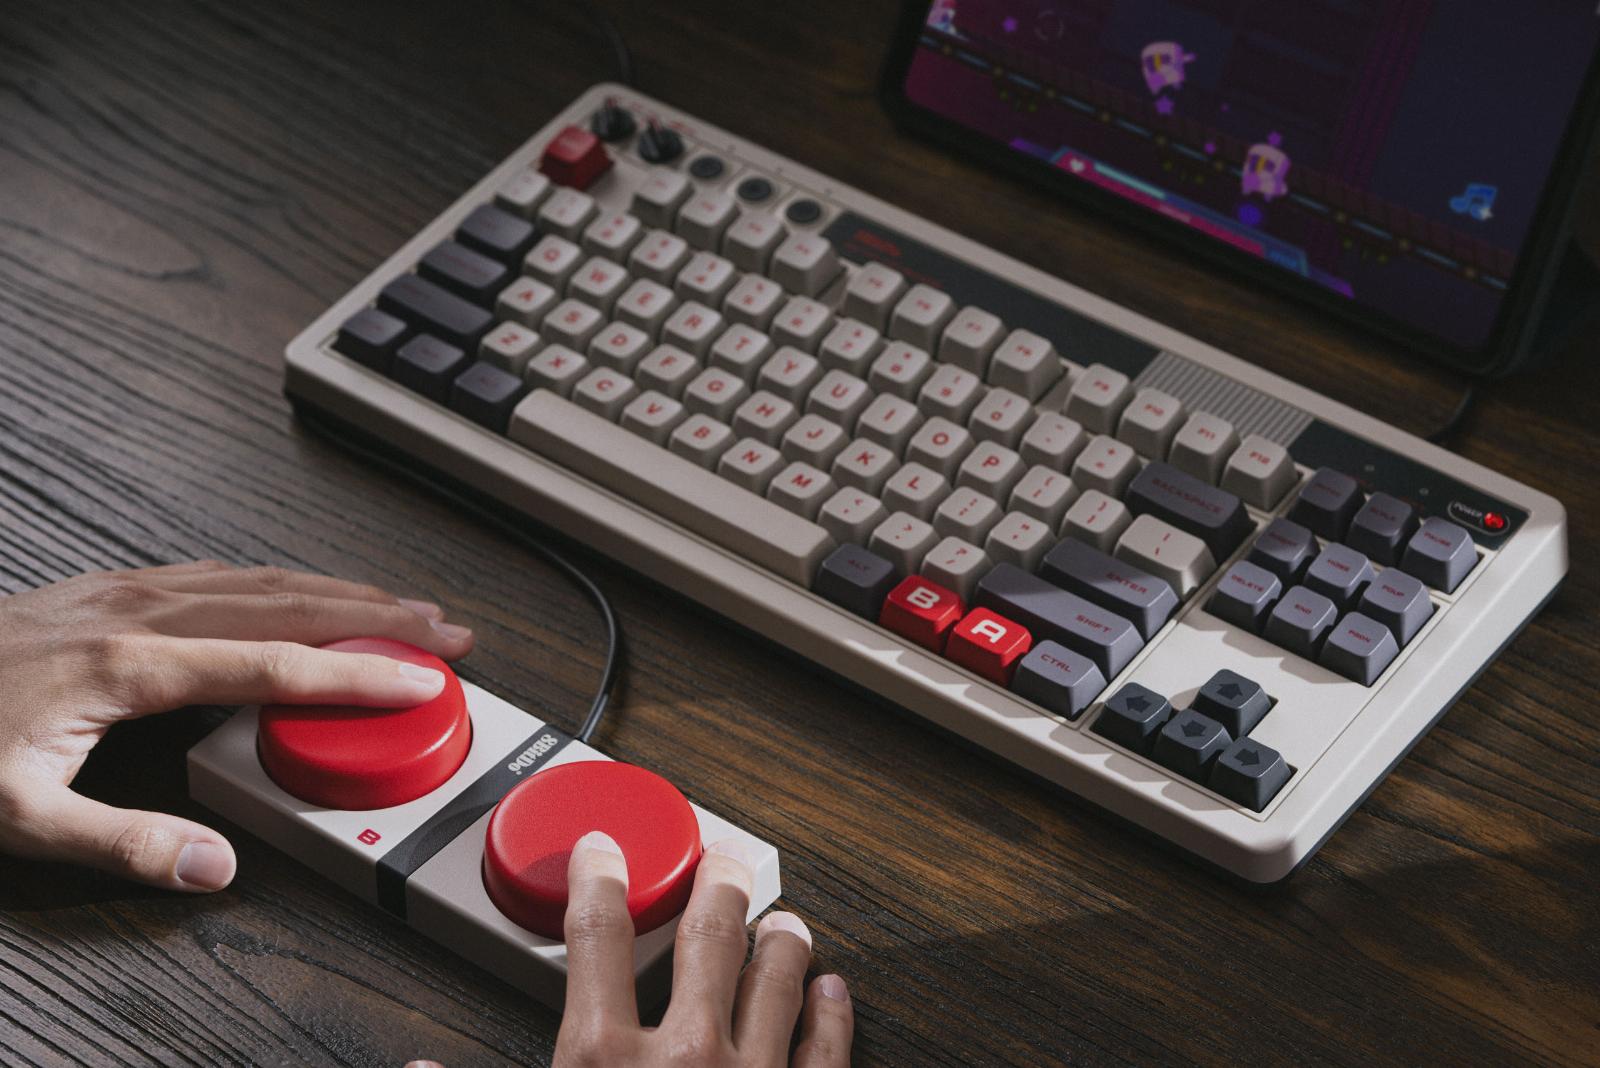 8BitDo’s NES-themed mechanical keyboard comes with truly large A and B ‘super buttons’